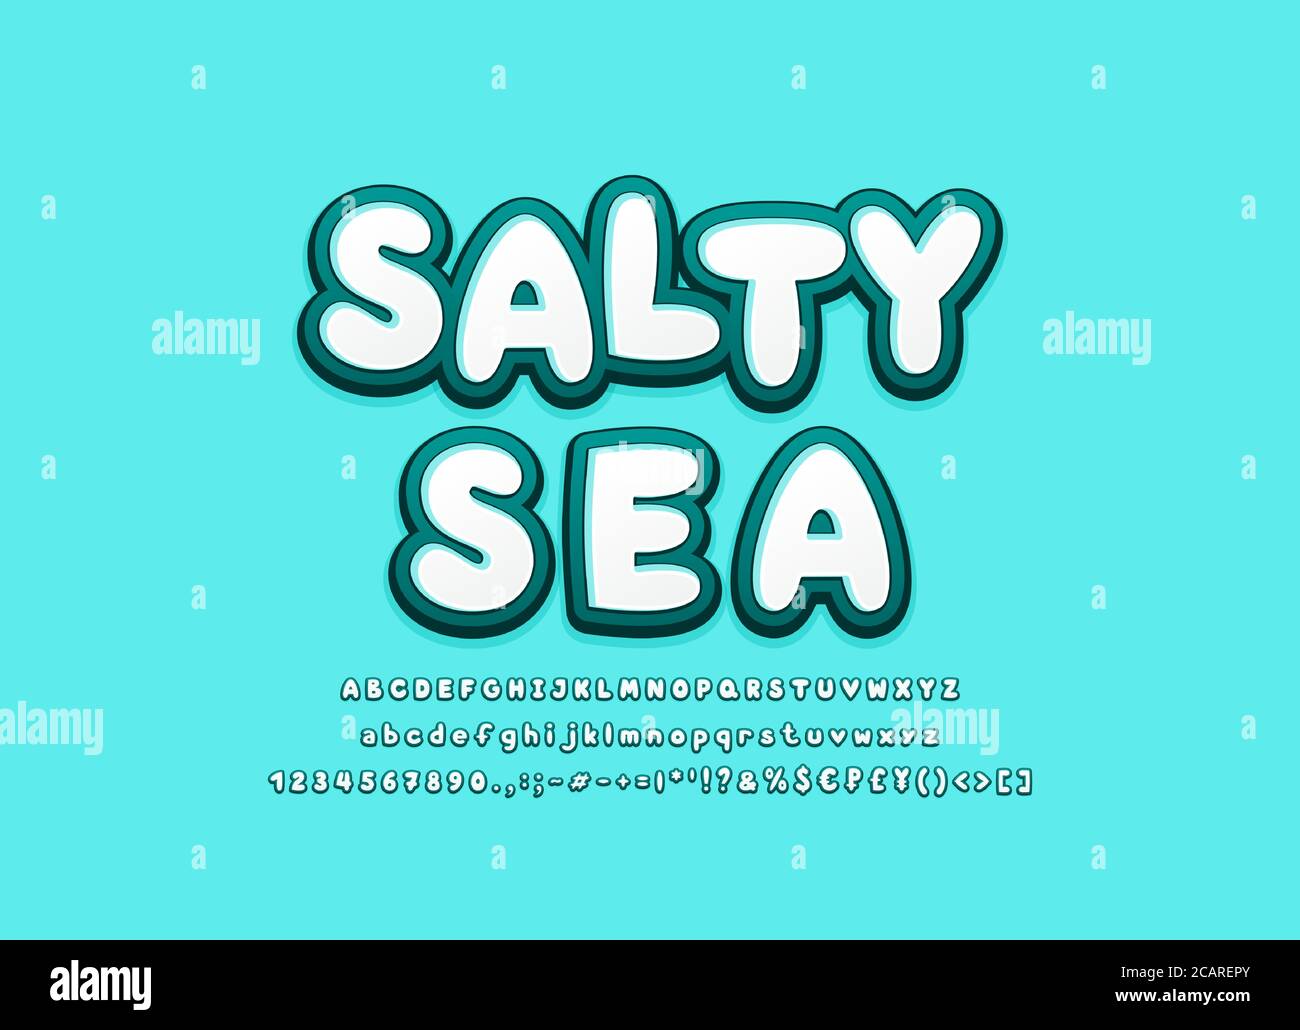 Salty sea alphabet 3d fonts marine turquoise colors. Cool cartoon bold typeface, uppercase and lowercase letters, numbers, symbols. Vector illustratio Stock Vector